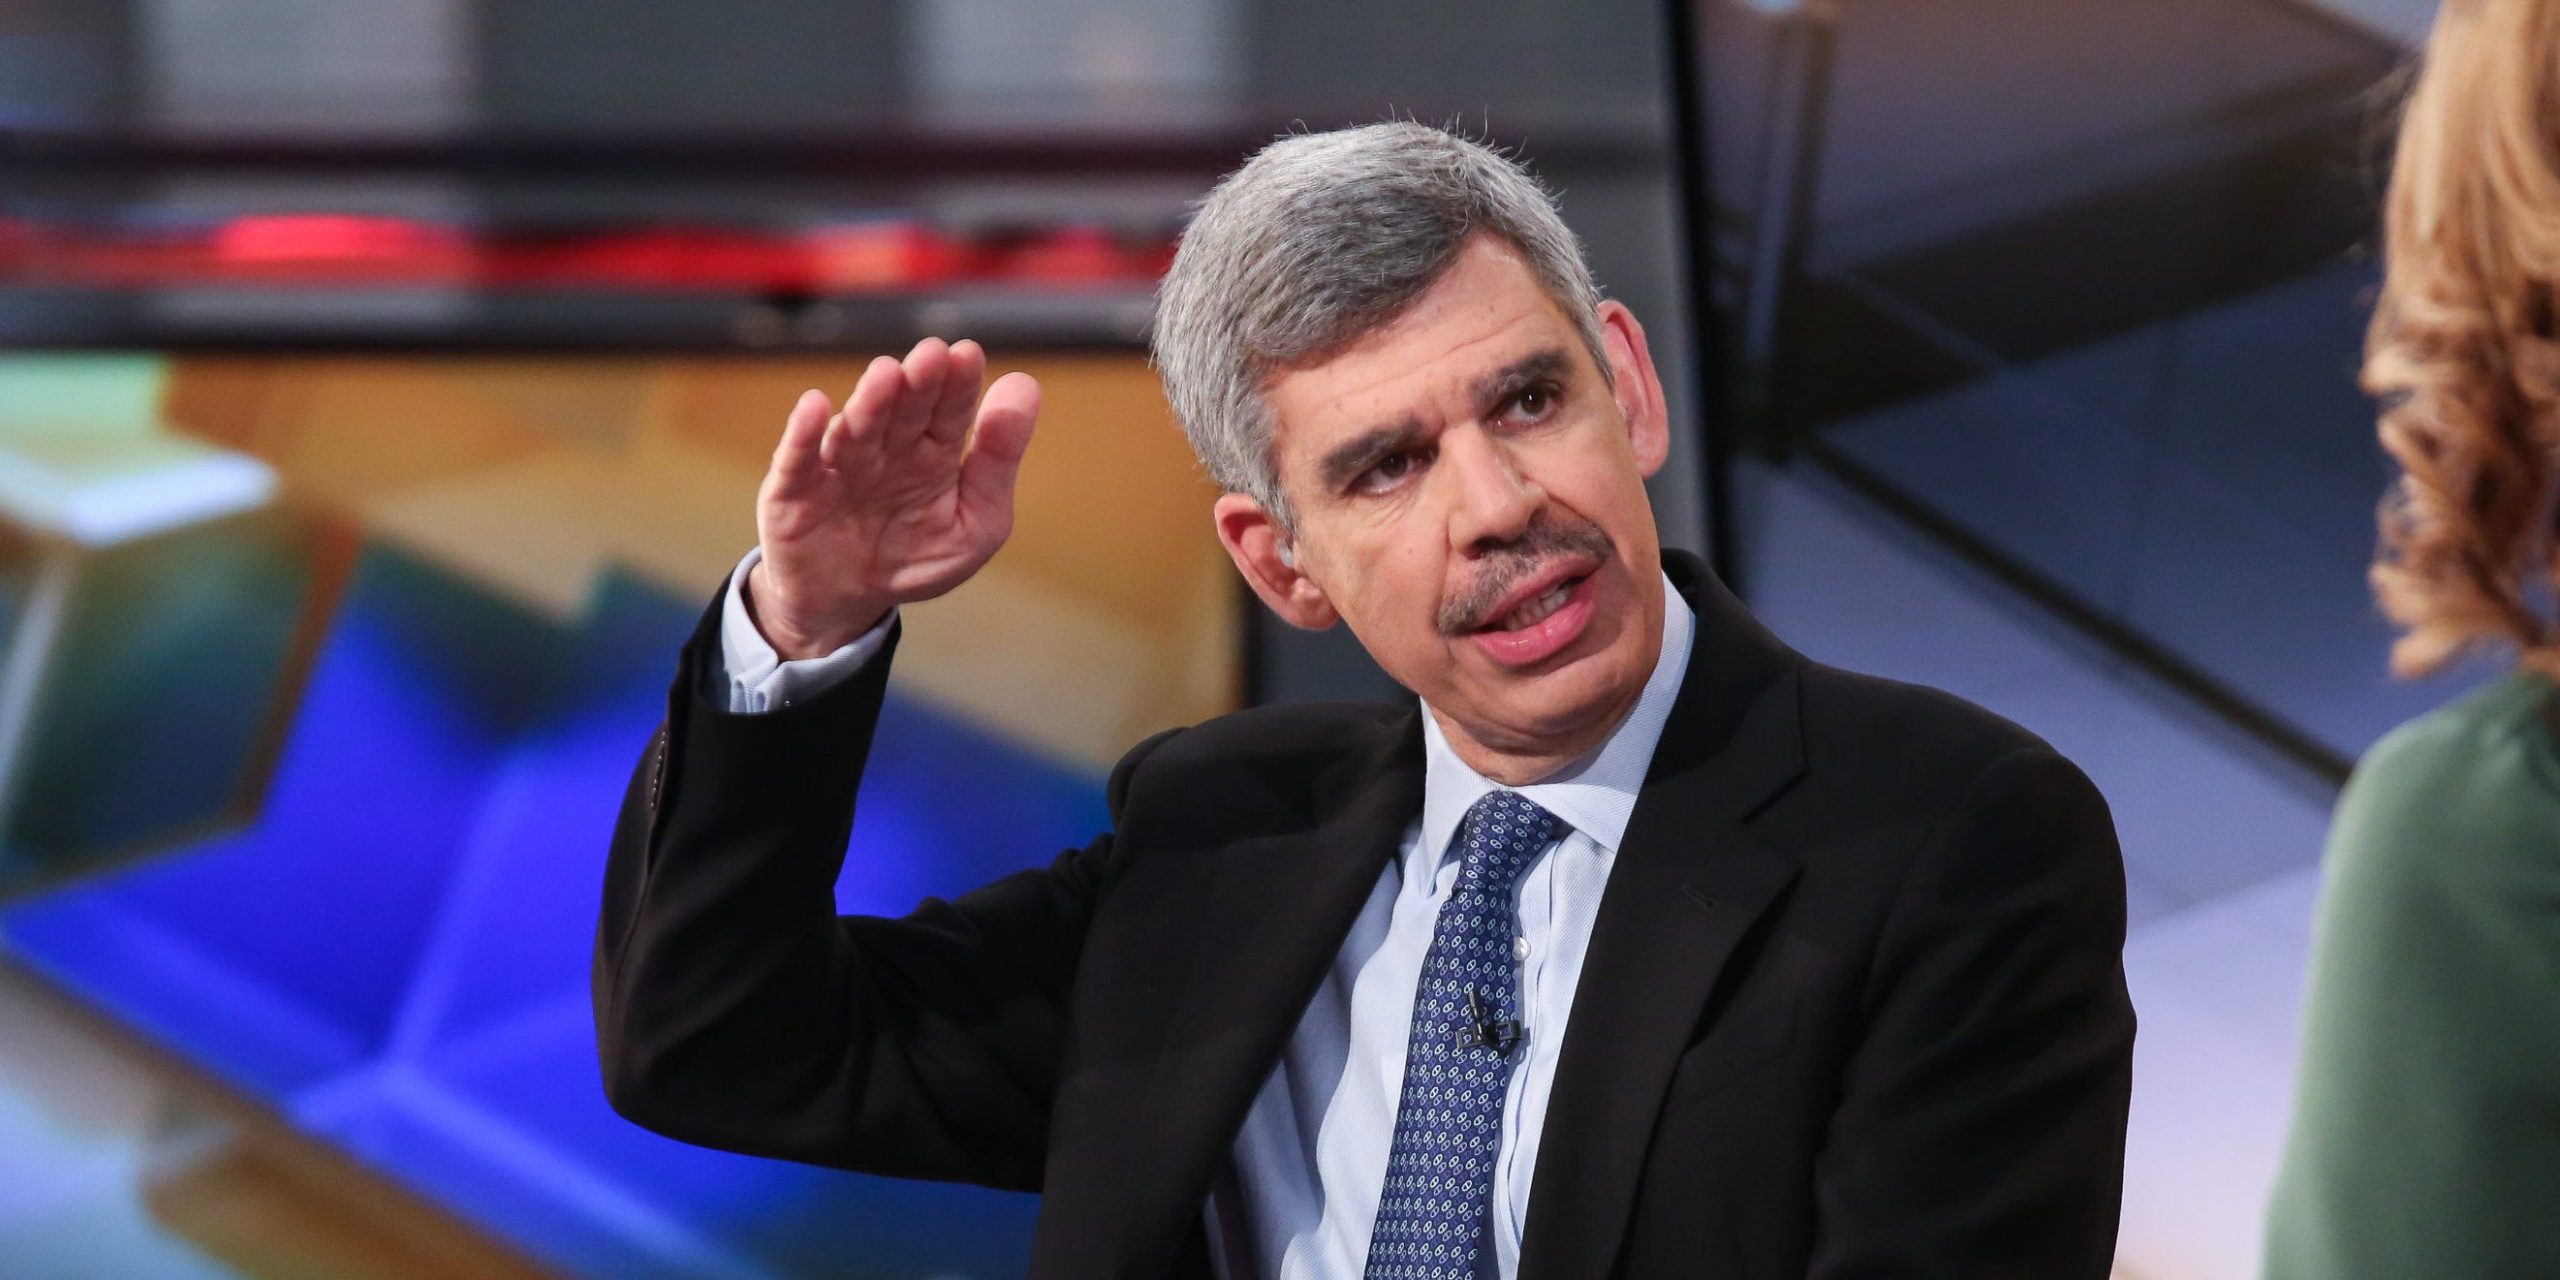 Mohamed El-Erian, Chief Economic Adviser of Allianz appears on a segment of "Mornings With Maria" with Maria Bartiromo on the FOX Business Network at FOX Studios on April 29, 2016 in New York City.